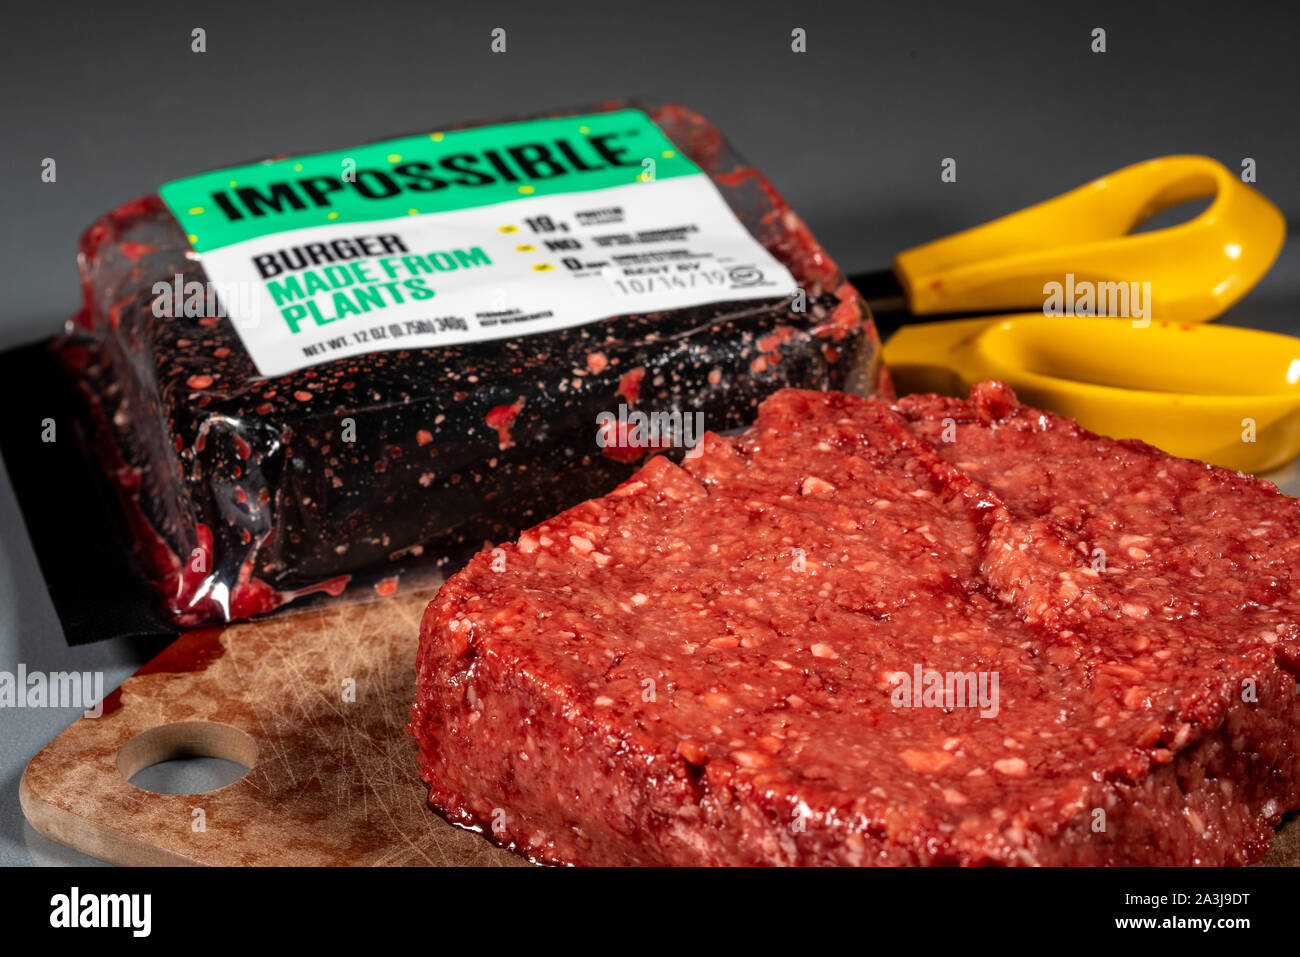 MORGANTOWN, WV - 8 October 2019: Packaging for Impossible Foods burger made from plants with raw product on steel background Stock Photo